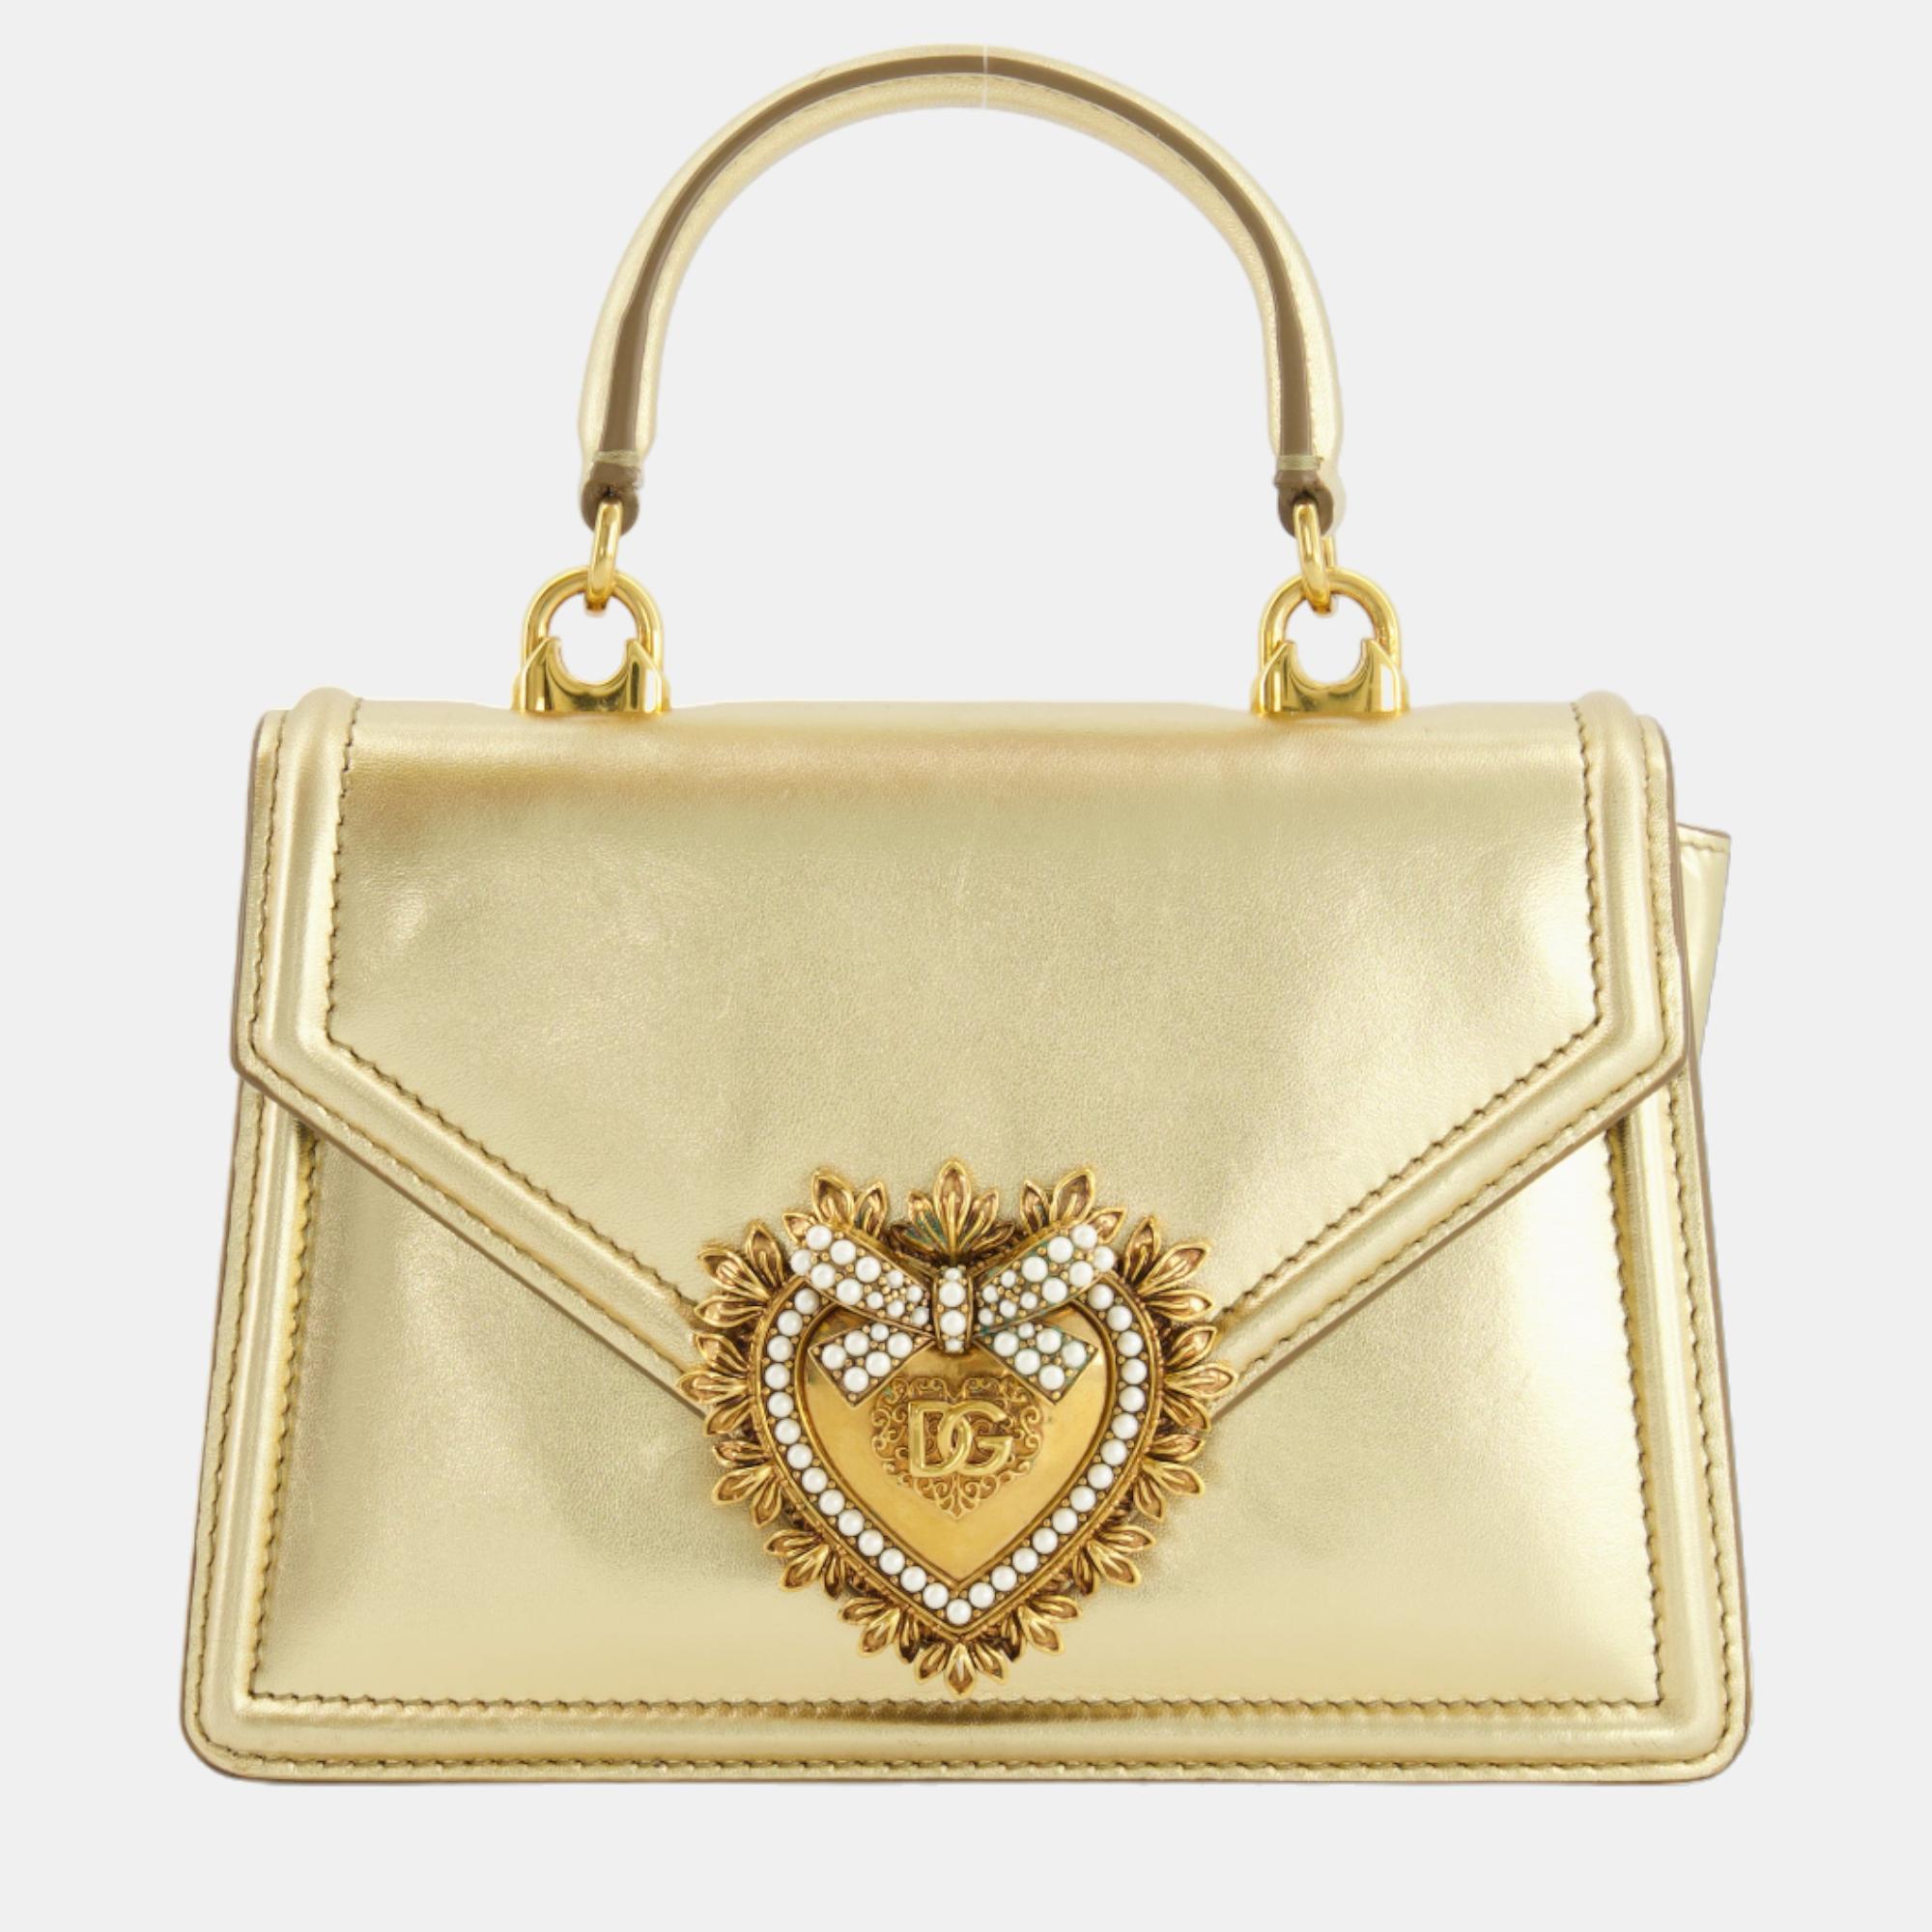 Dolce & Gabbana Gold Leather Small Devotion Top-Handle Bag With Gold Hardware